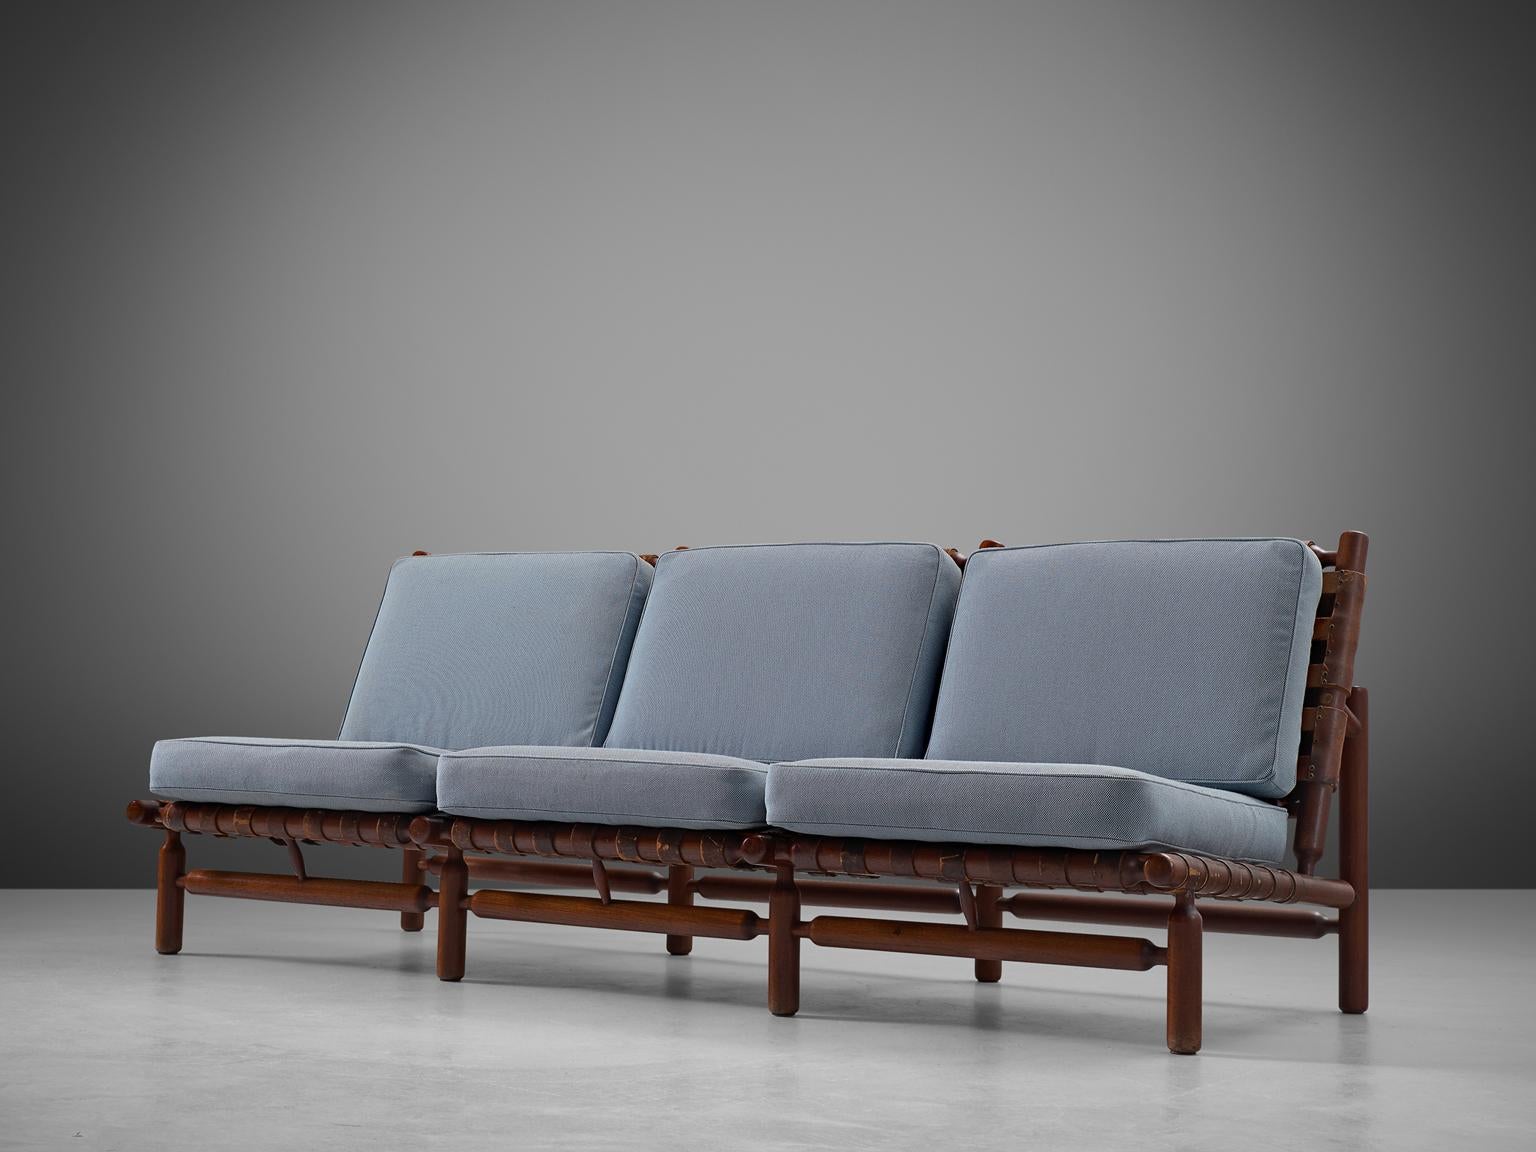 Sofa and lounge chair, in teak and leather, by Ilmari Tapiovaara for Esposizione La Permanente Mobili manufactured by Paolo Arnaboldi, Italy, 1957. 

This rare three-seat sofa and lounge chair by Finnish designer Ilmari Tapiovaara (1914-1999).